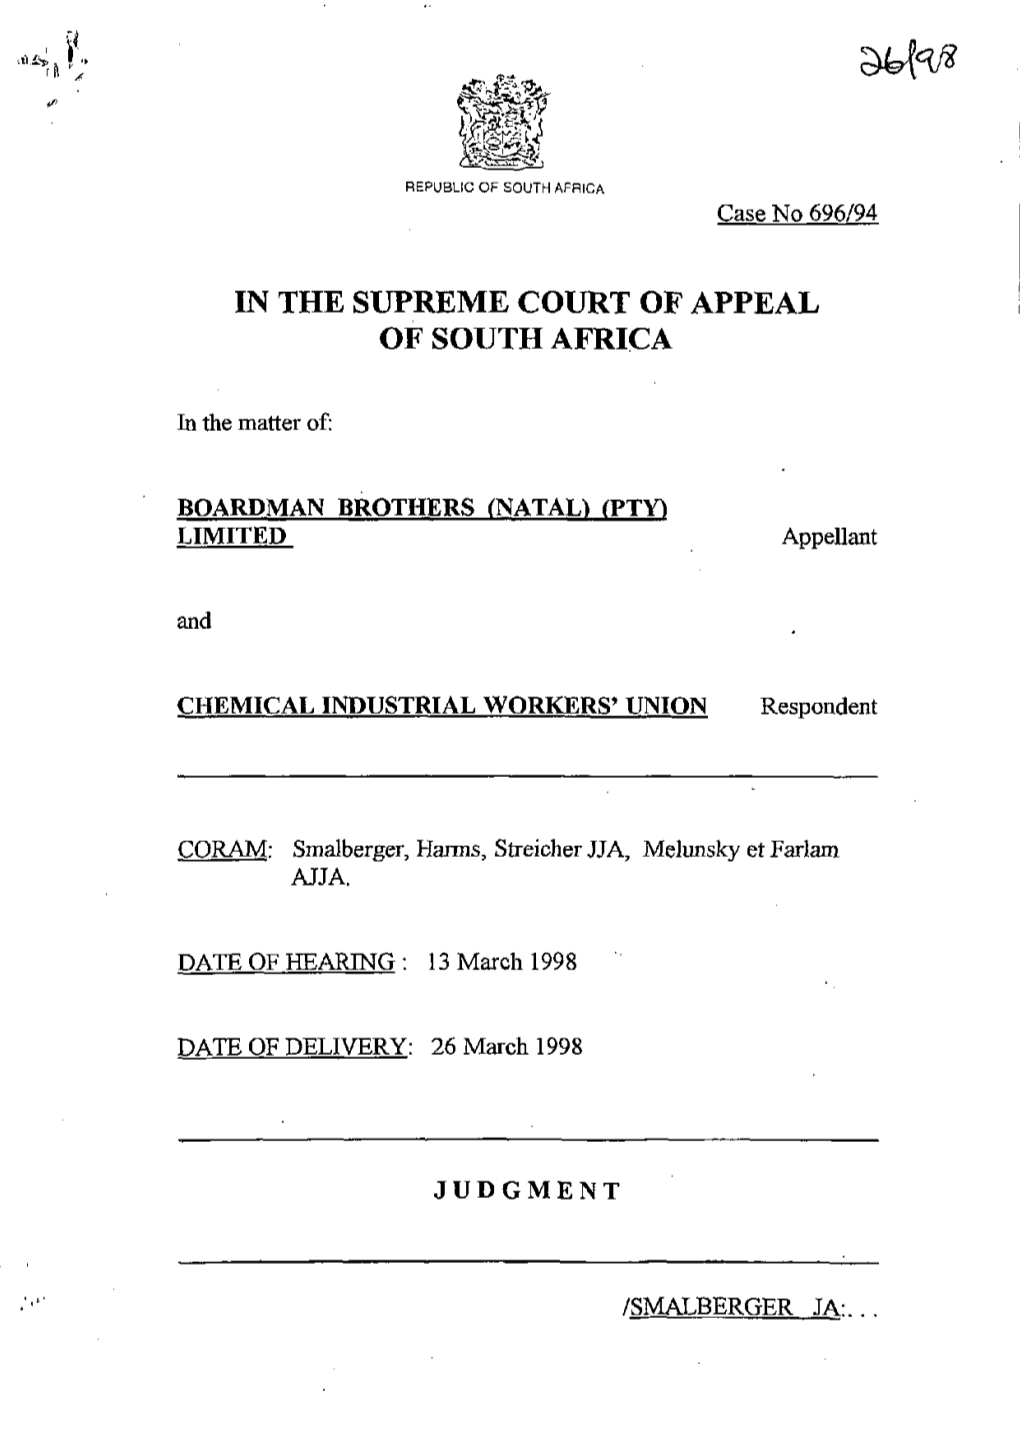 In the Supreme Court of Appeal of South Africa